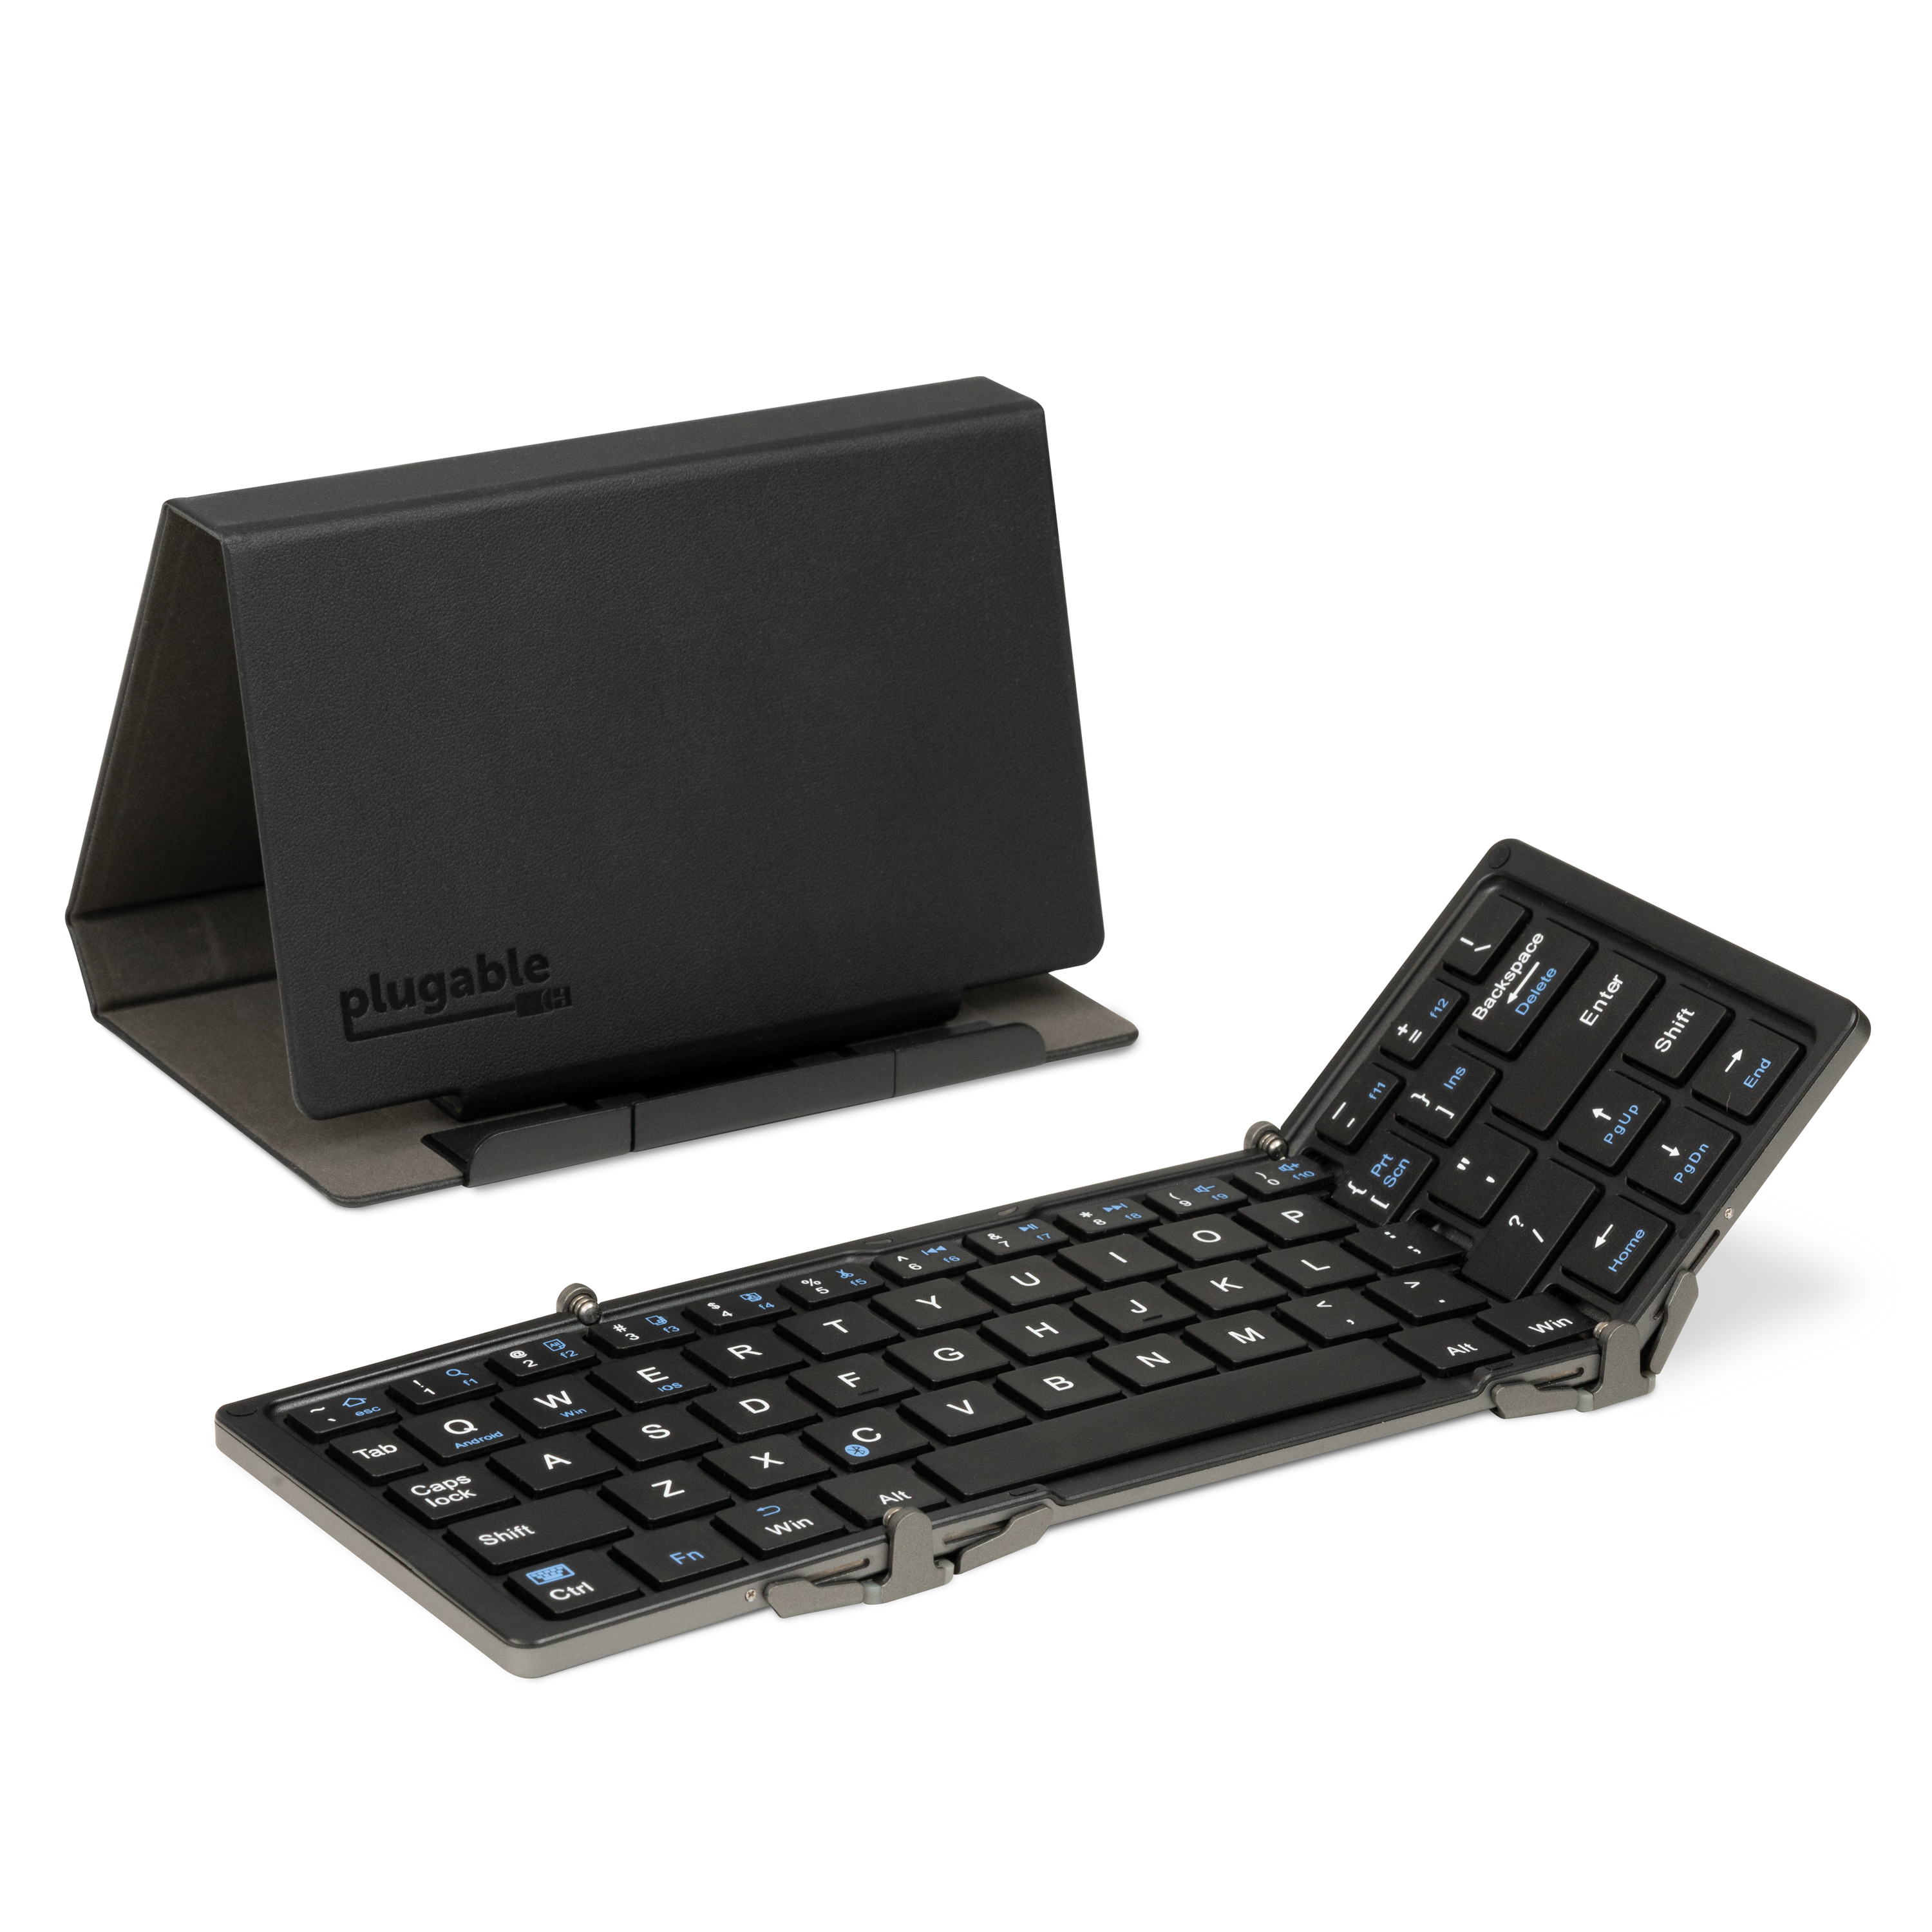 Plugable Foldable Bluetooth Keyboard Compatible with iPad, iPhones, Android, and Windows, Compact Multi-Device Keyboard, Wireless and Portable with Included Stand for iPad/iPhone (10 inches) - image 1 of 9